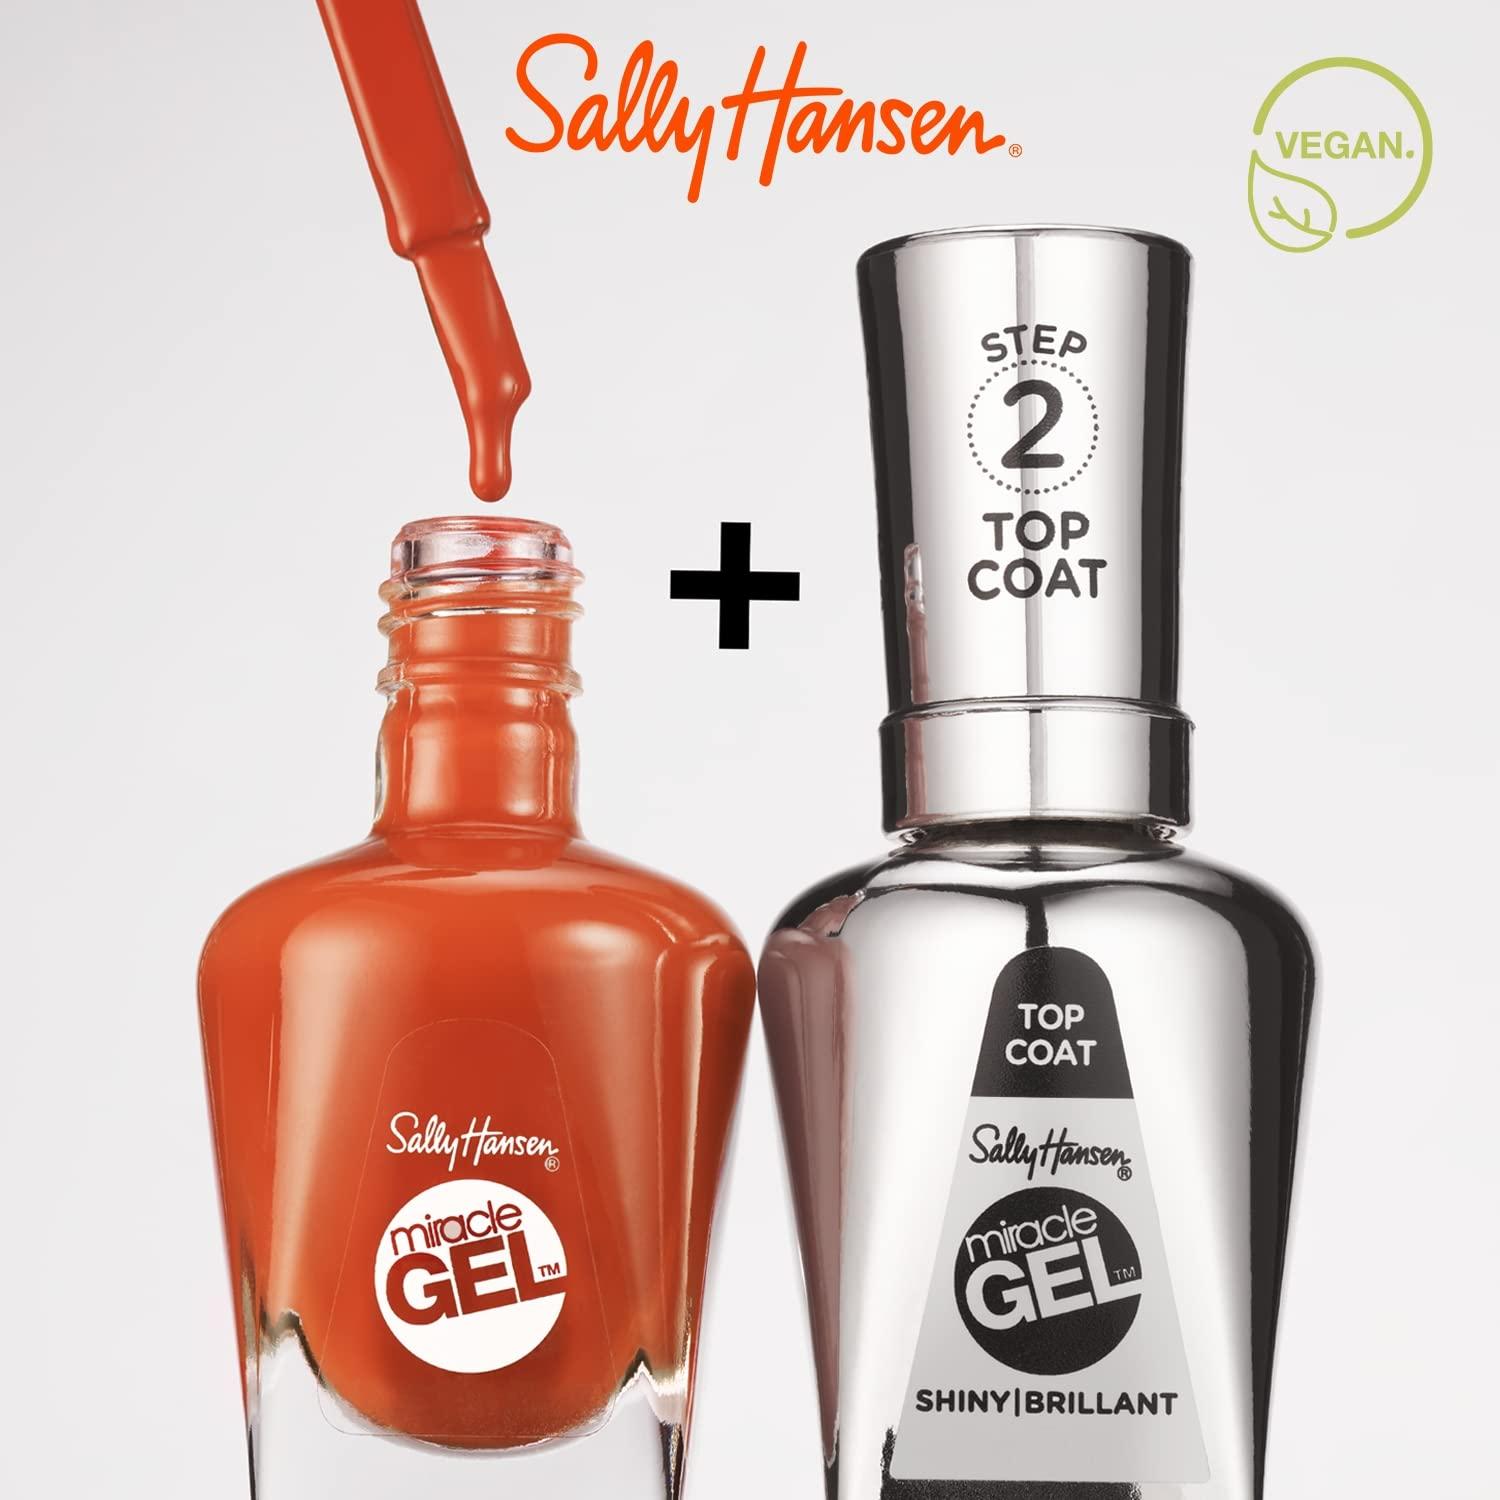 Sally Hansen's Miracle Gel Matte Top Coat Gave Me a Perfect At-Home Manicure  - Review | Allure